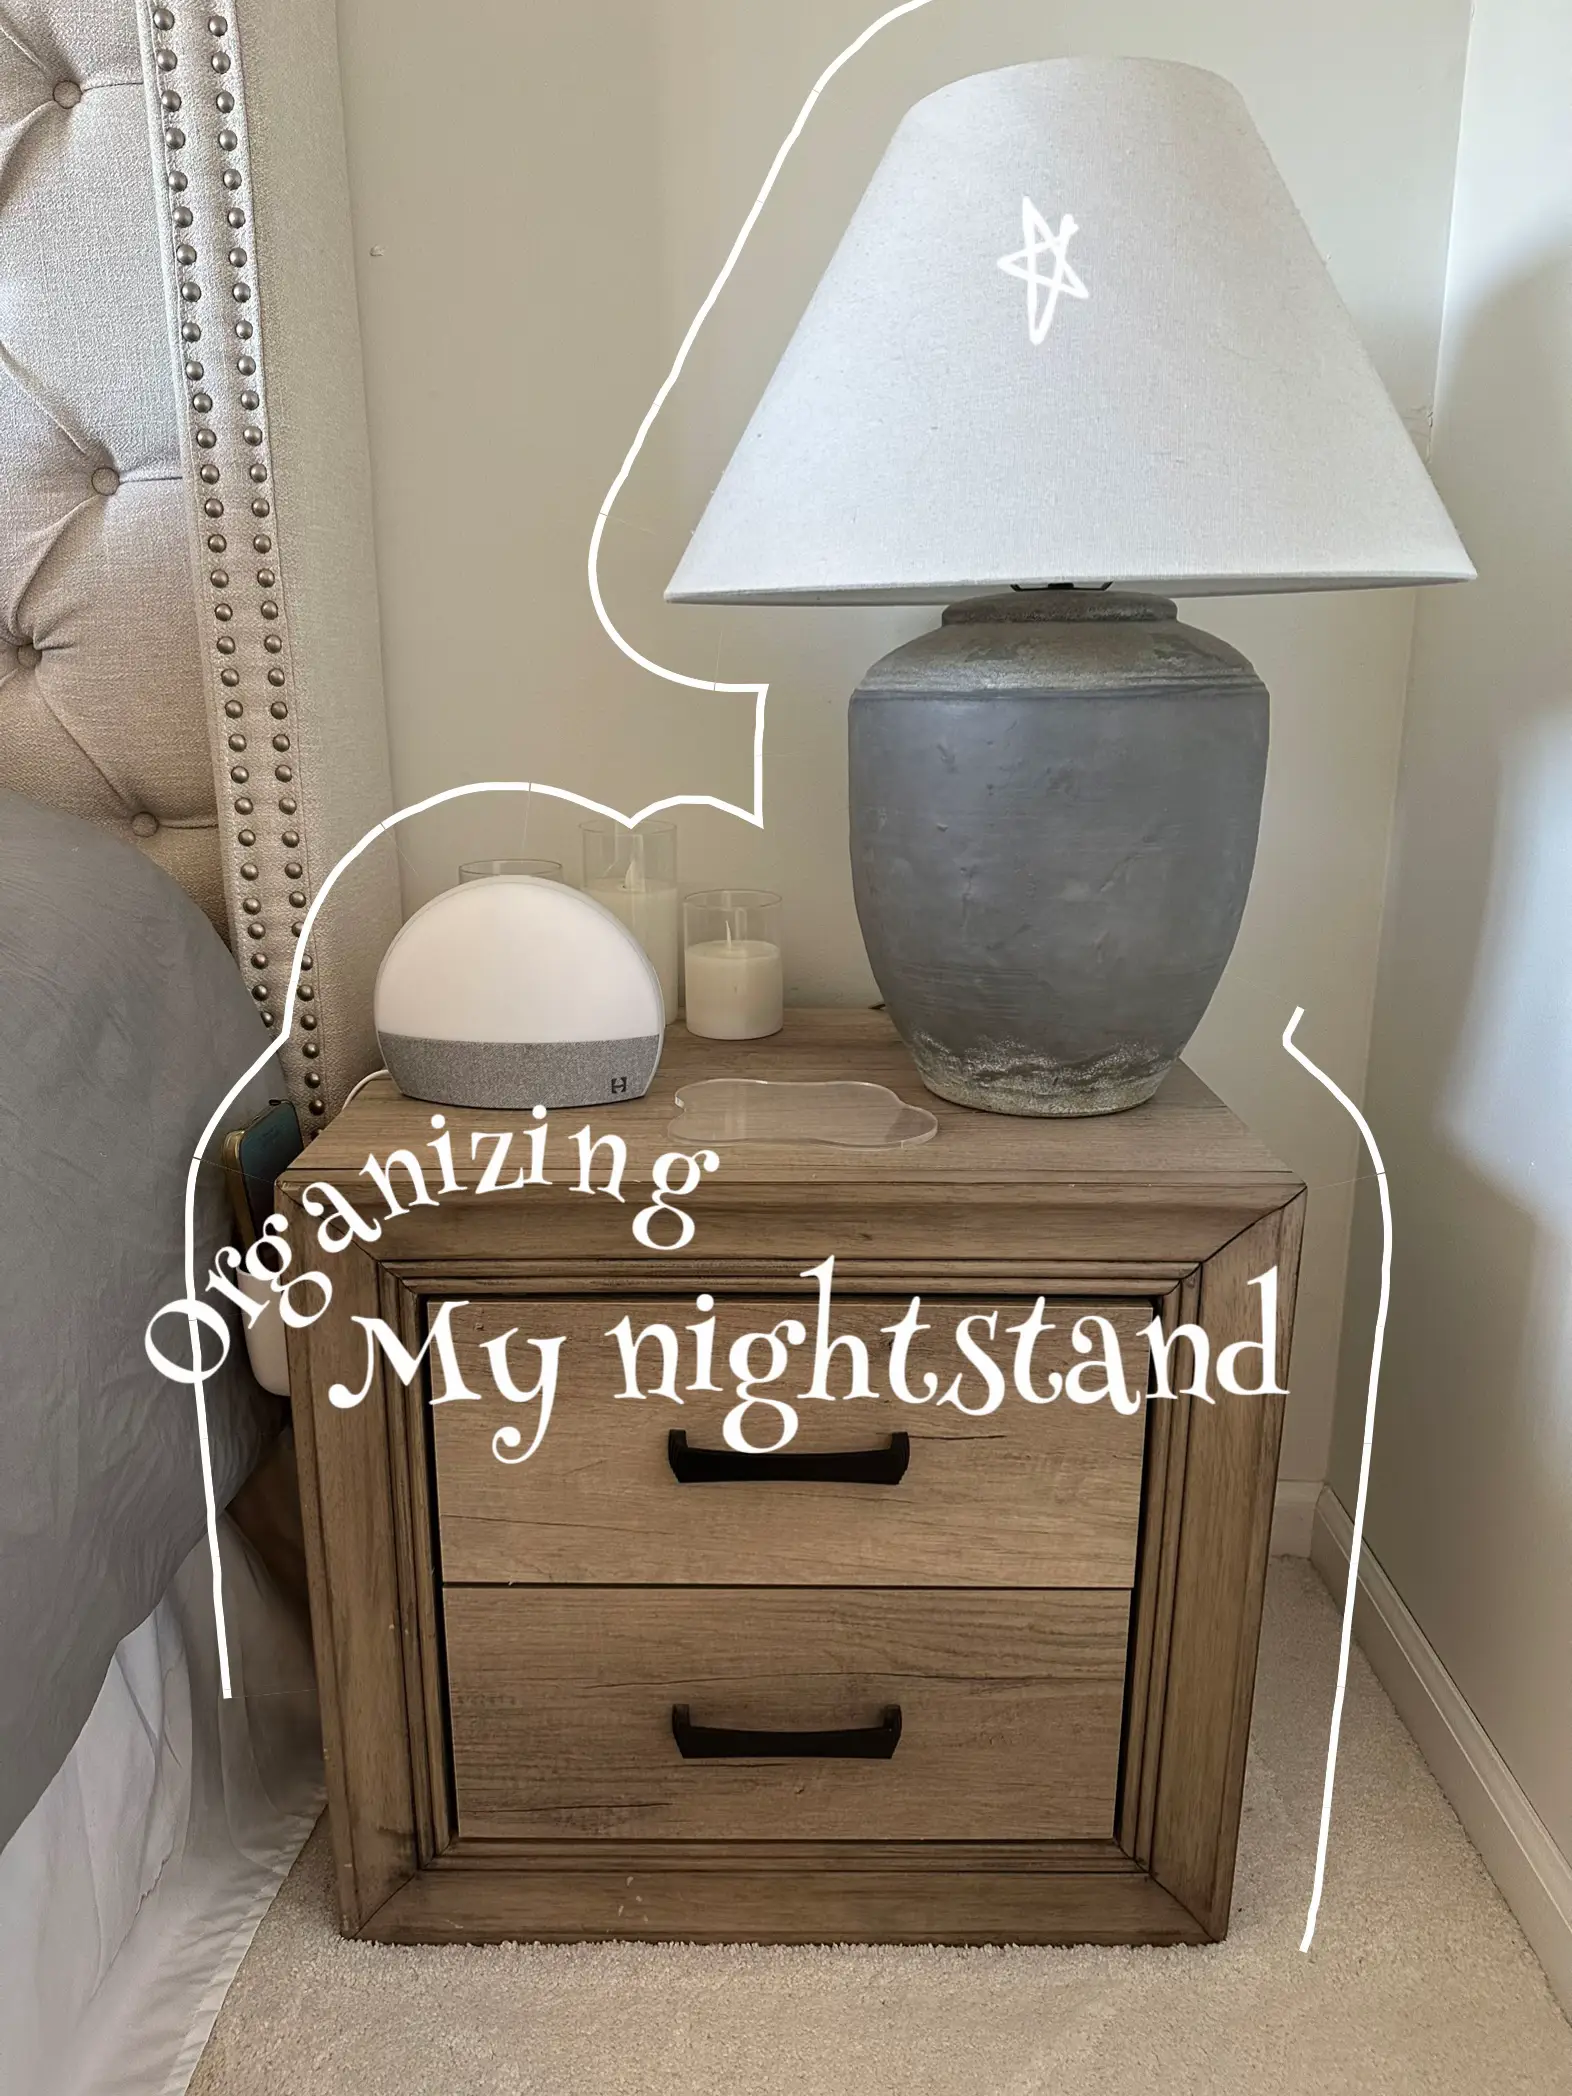 How to Organize a Nightstand